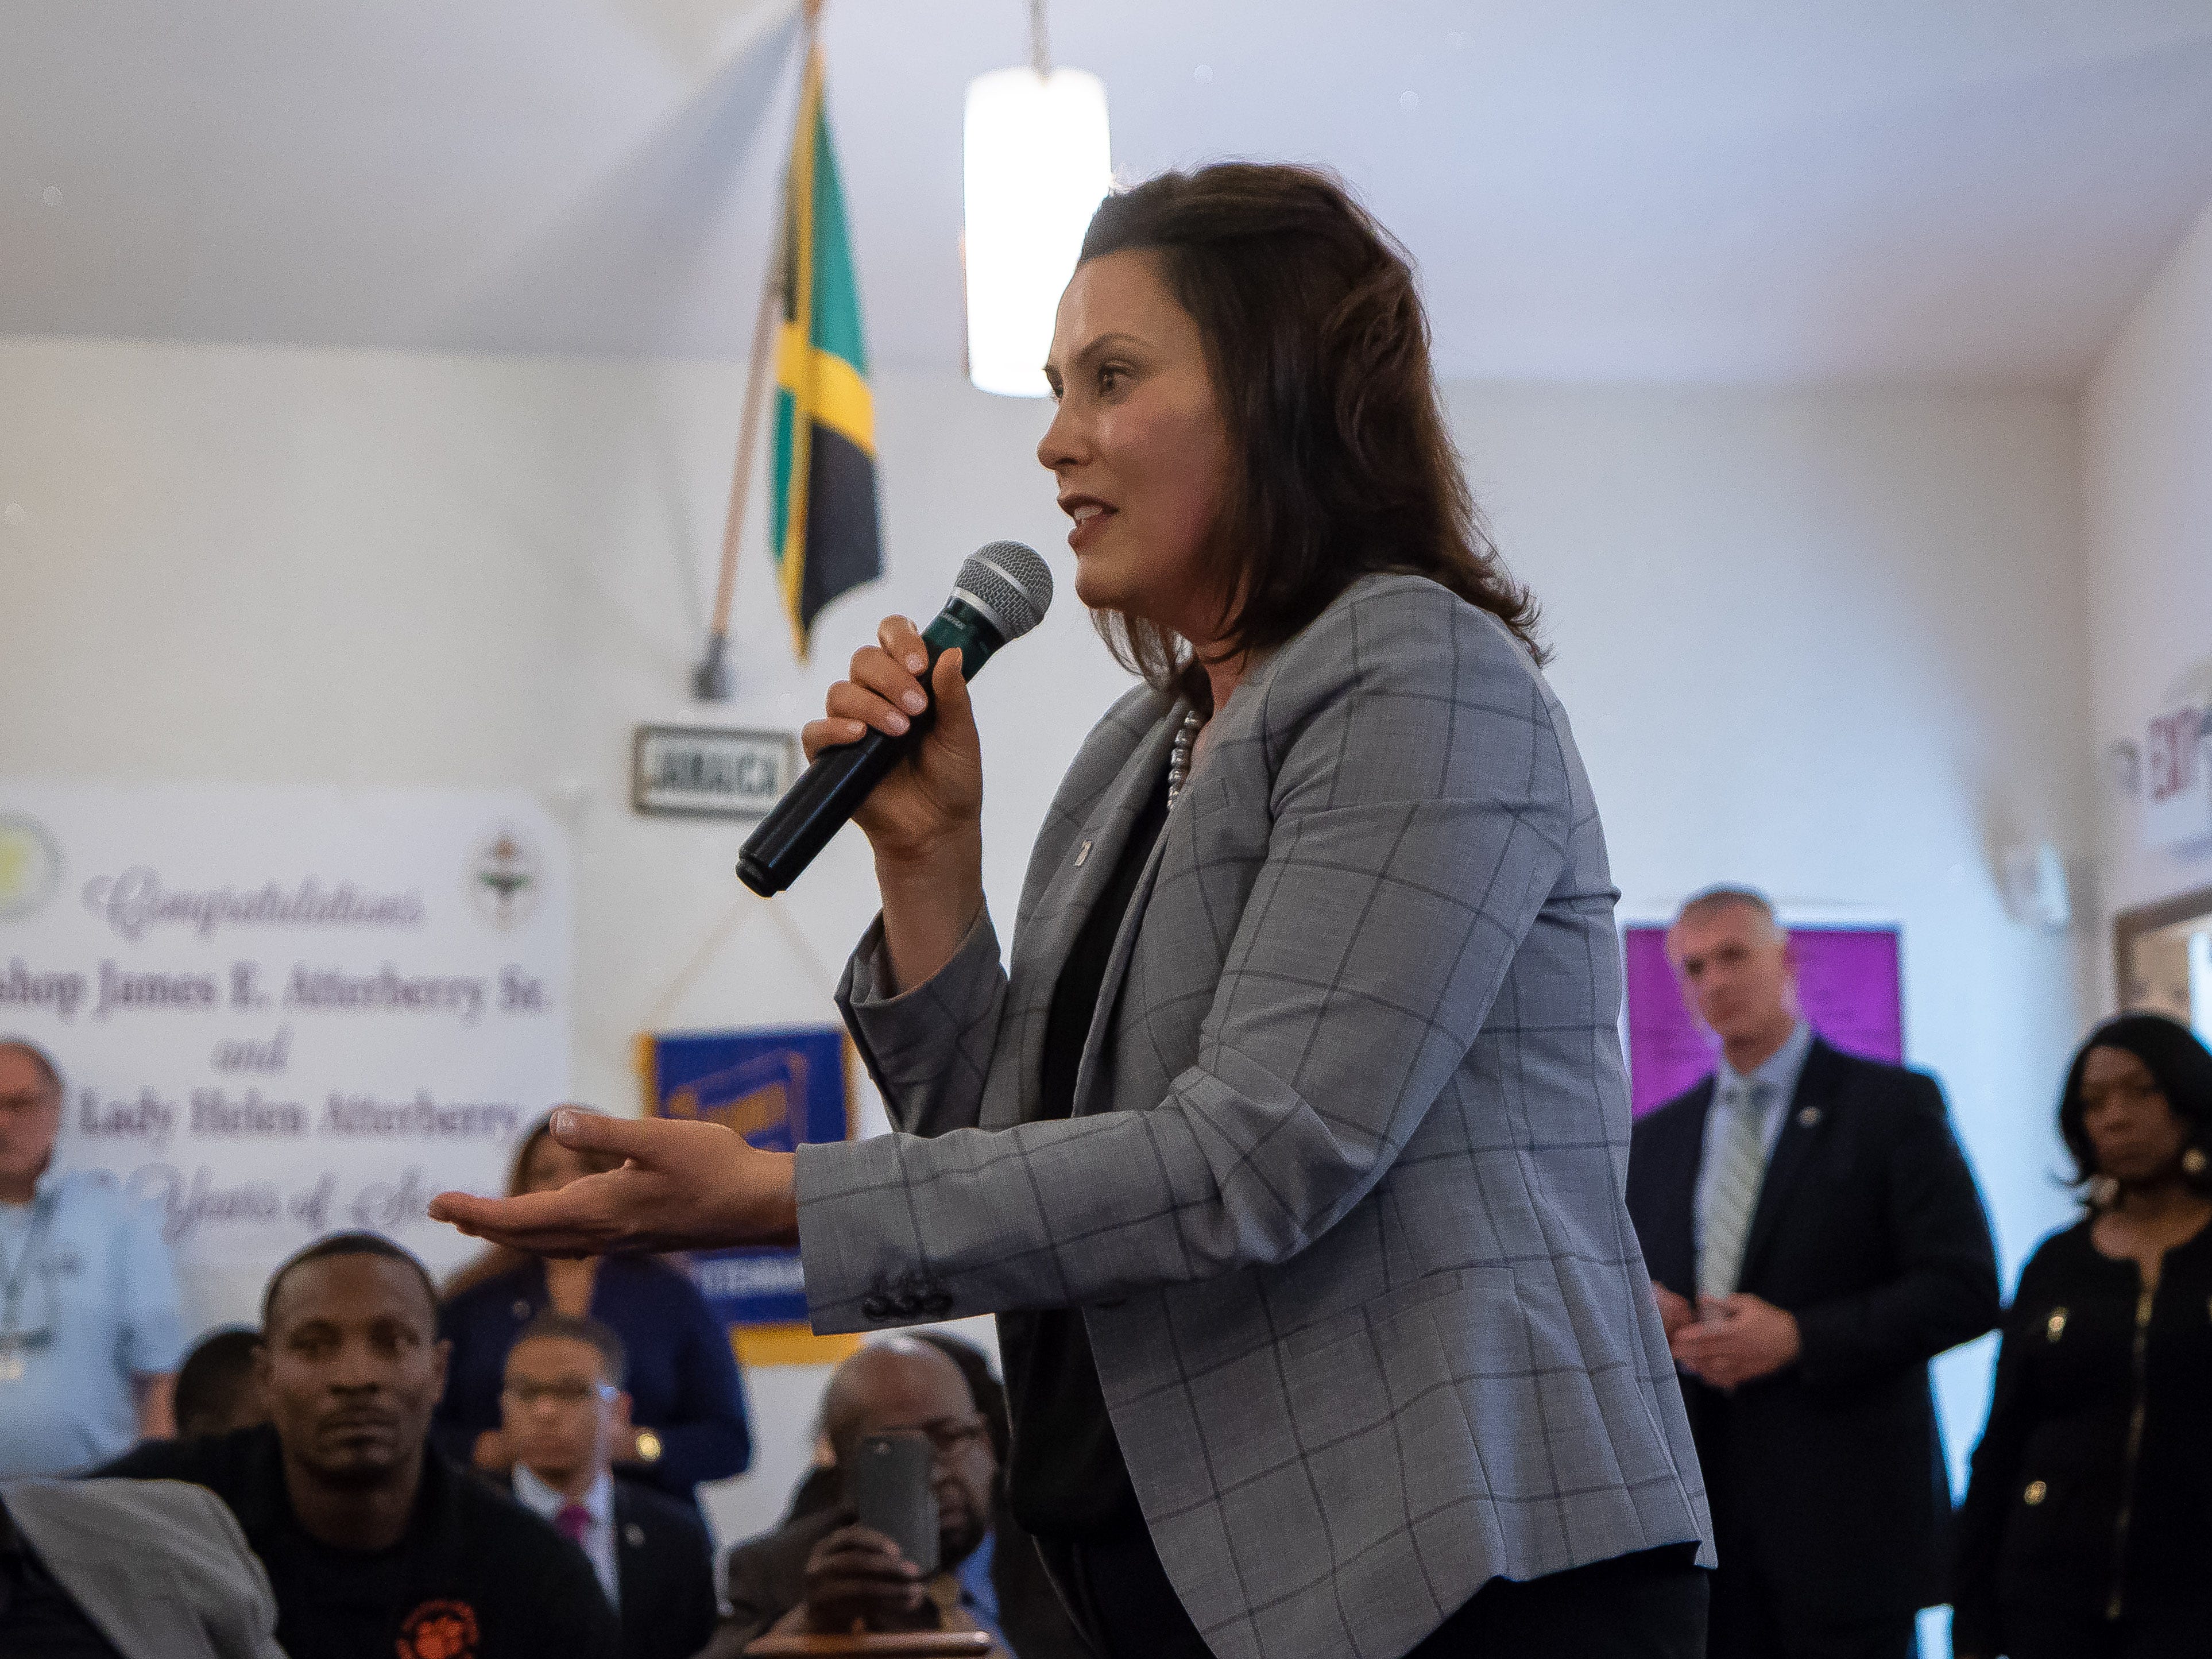 Gov. Gretchen Whitmer addresses residents of Benton Harbor during a special community meeting June 5 to discuss the state's proposal to close Benton Harbor High School.